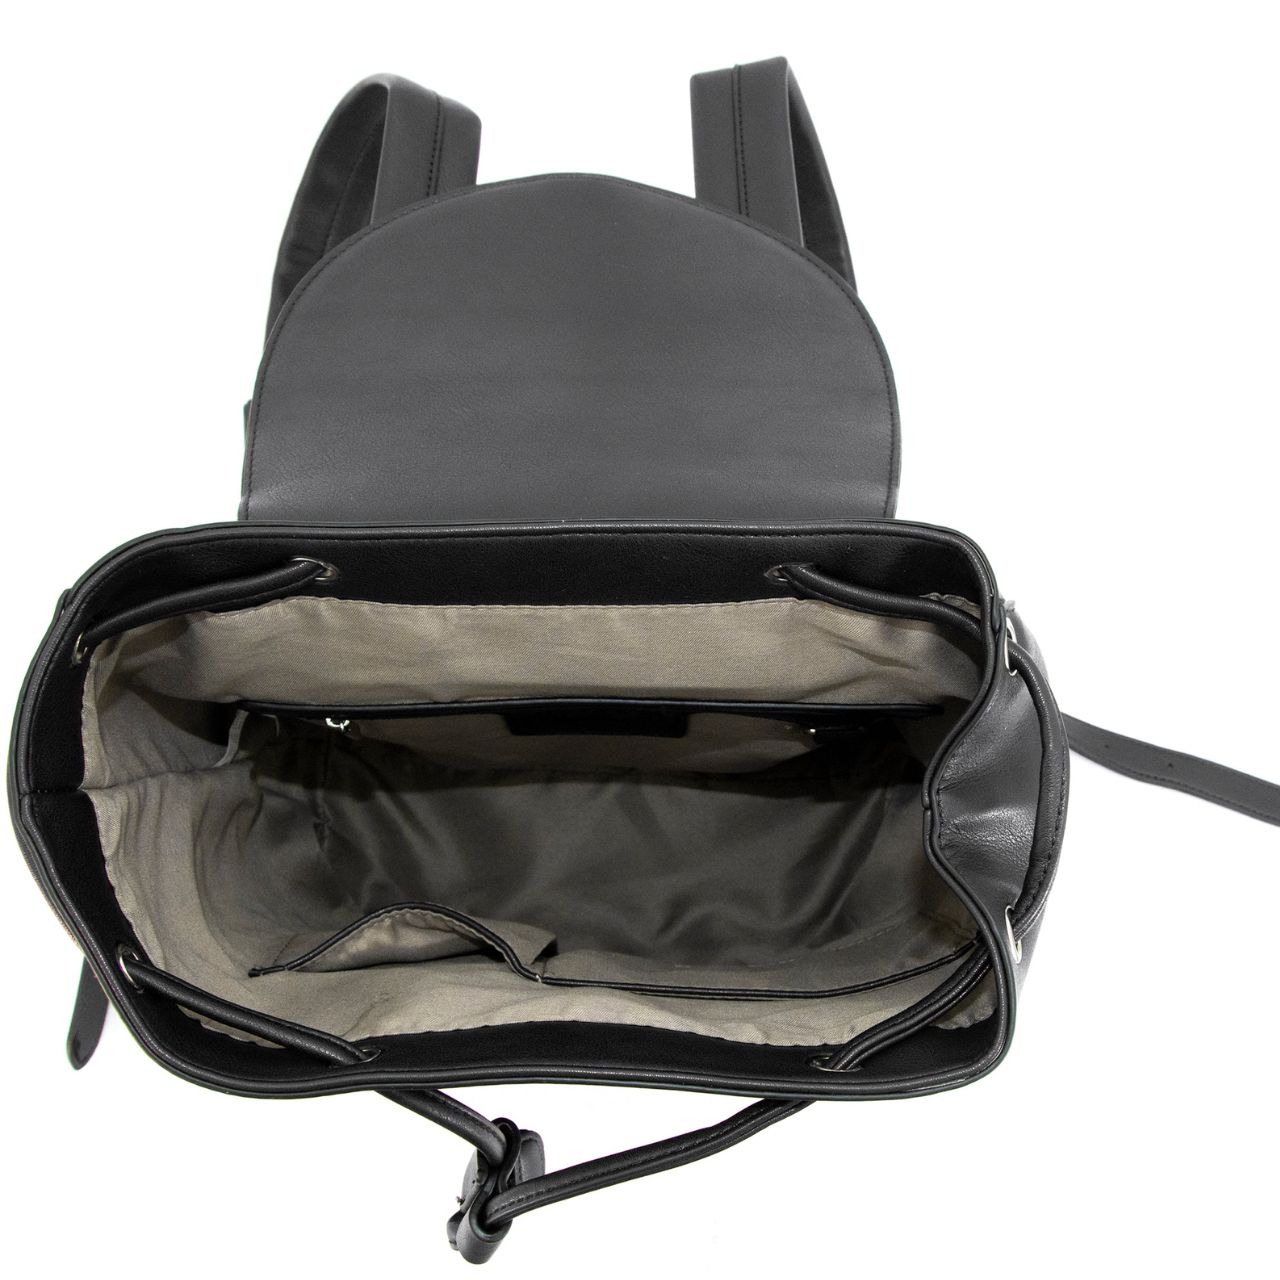 Inside of Black colored "Amelia" concealed carry backpack